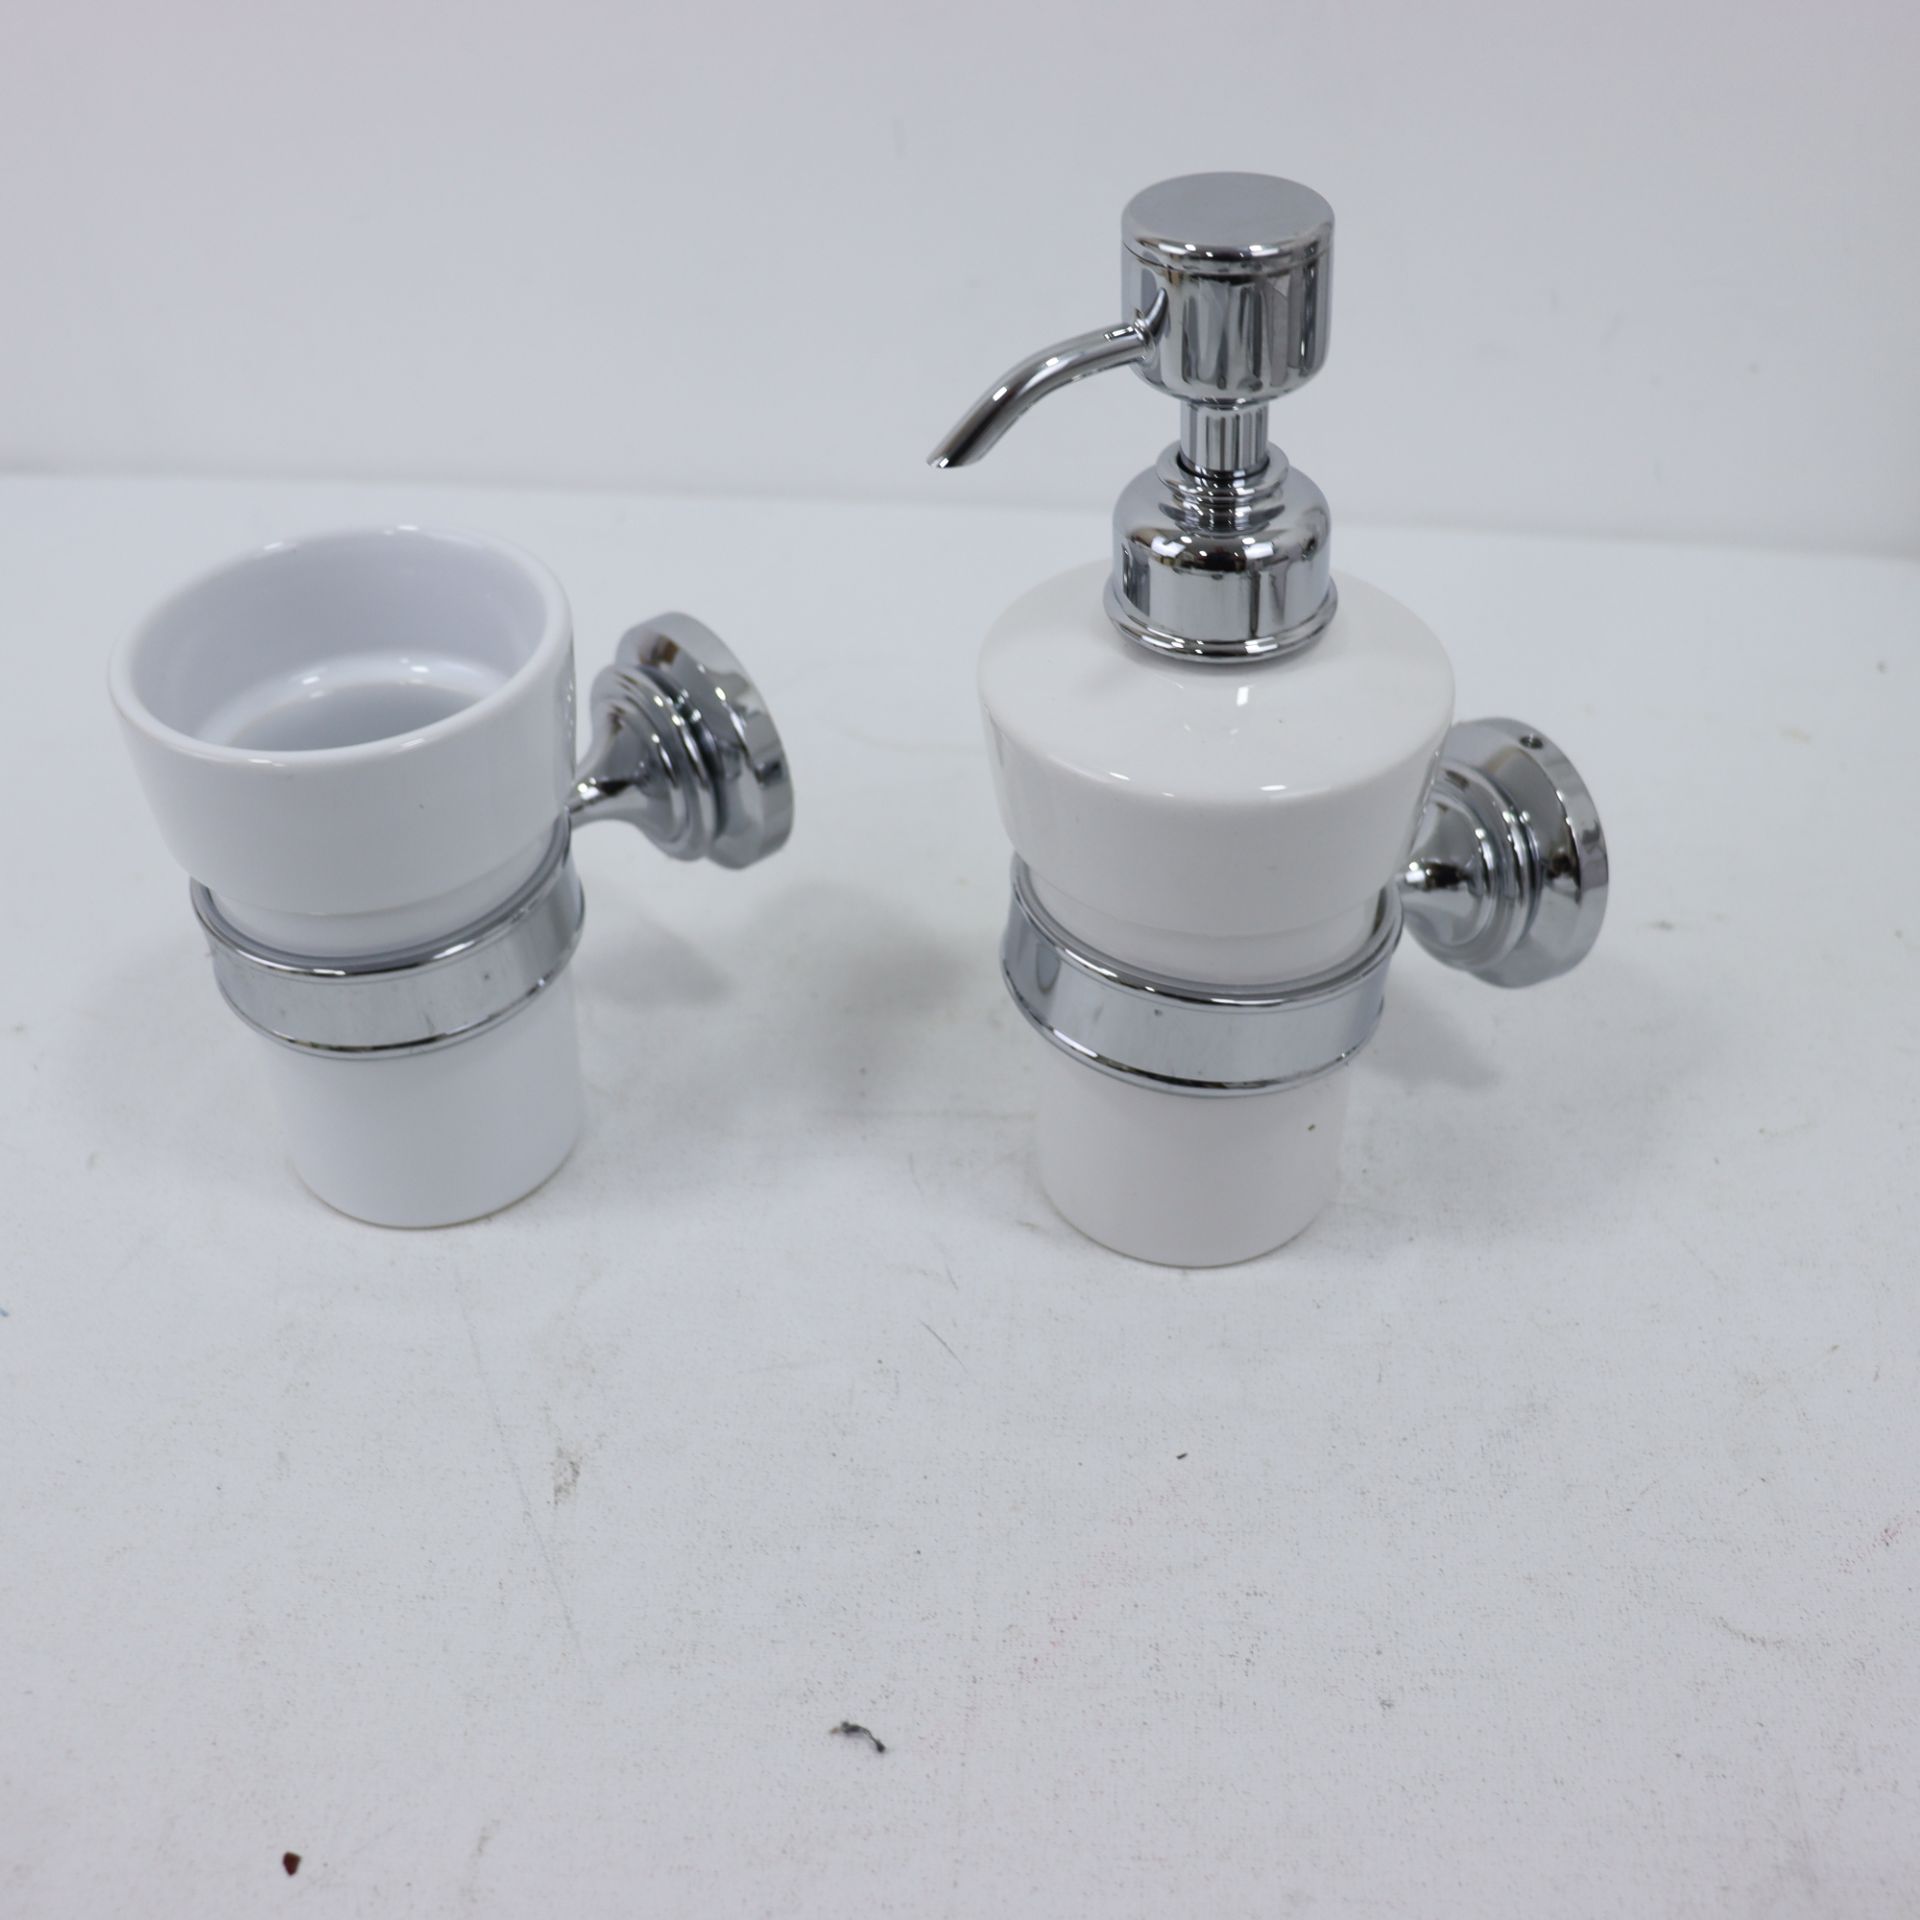 Bathstore Soap Dispenser and Toothbrush Holder - Image 2 of 2